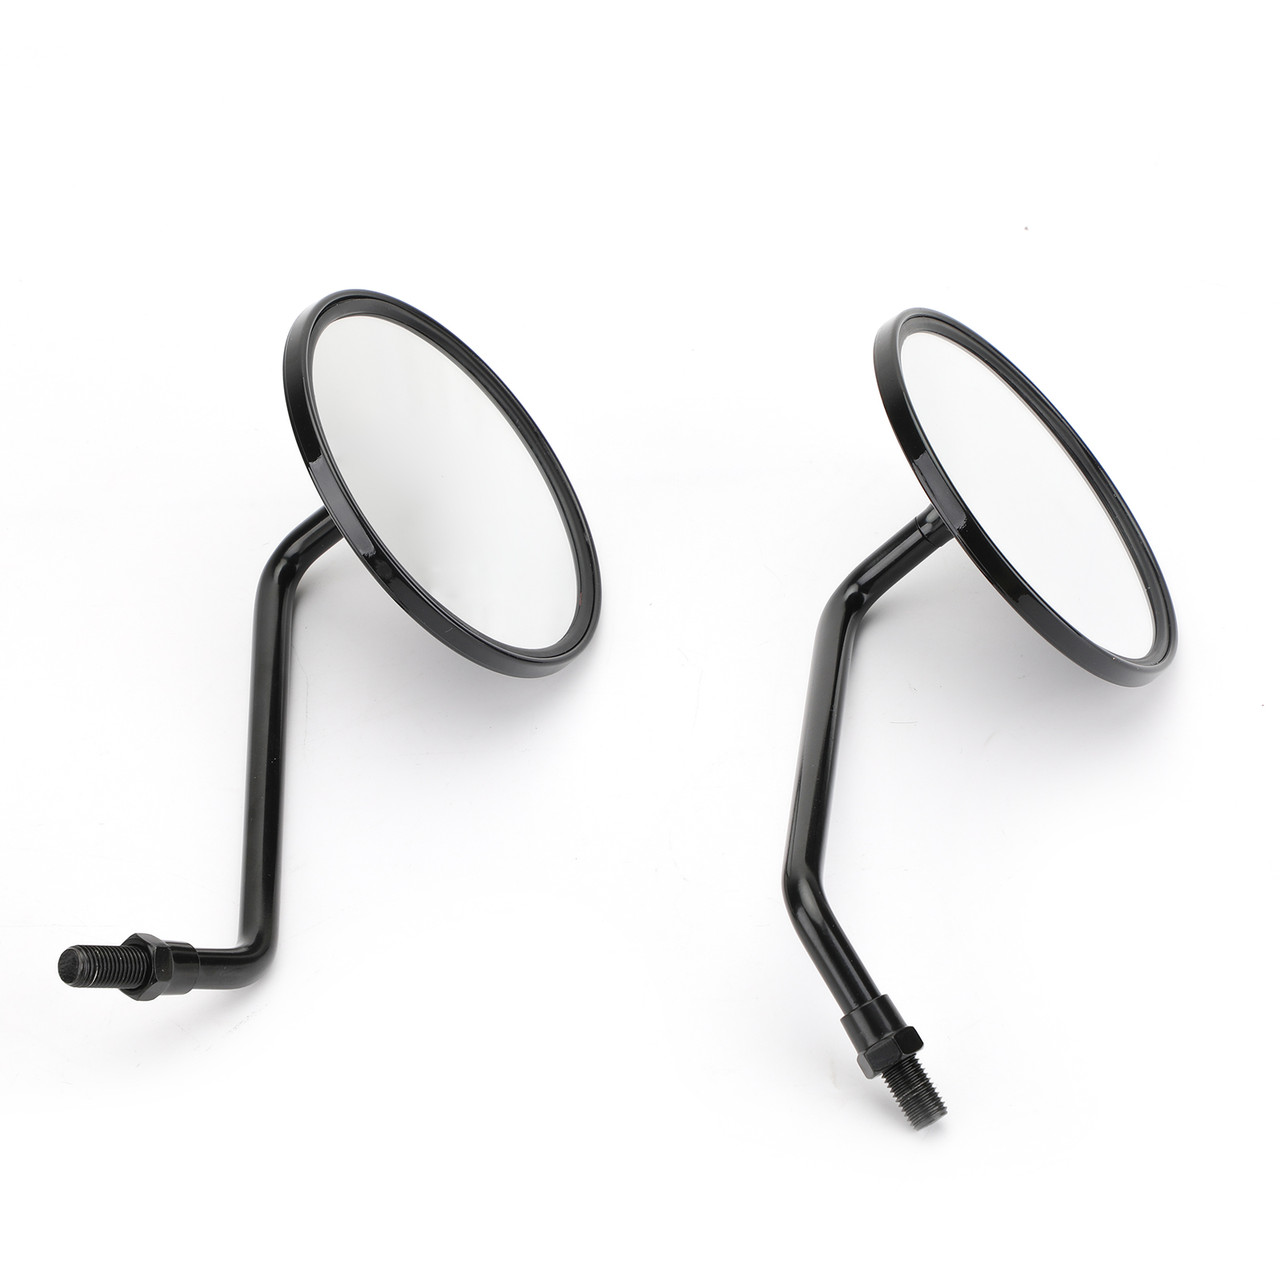 Pair of 10MM-CW Mirrors fits for Honda with 10MM(CW) threads Black~BC2